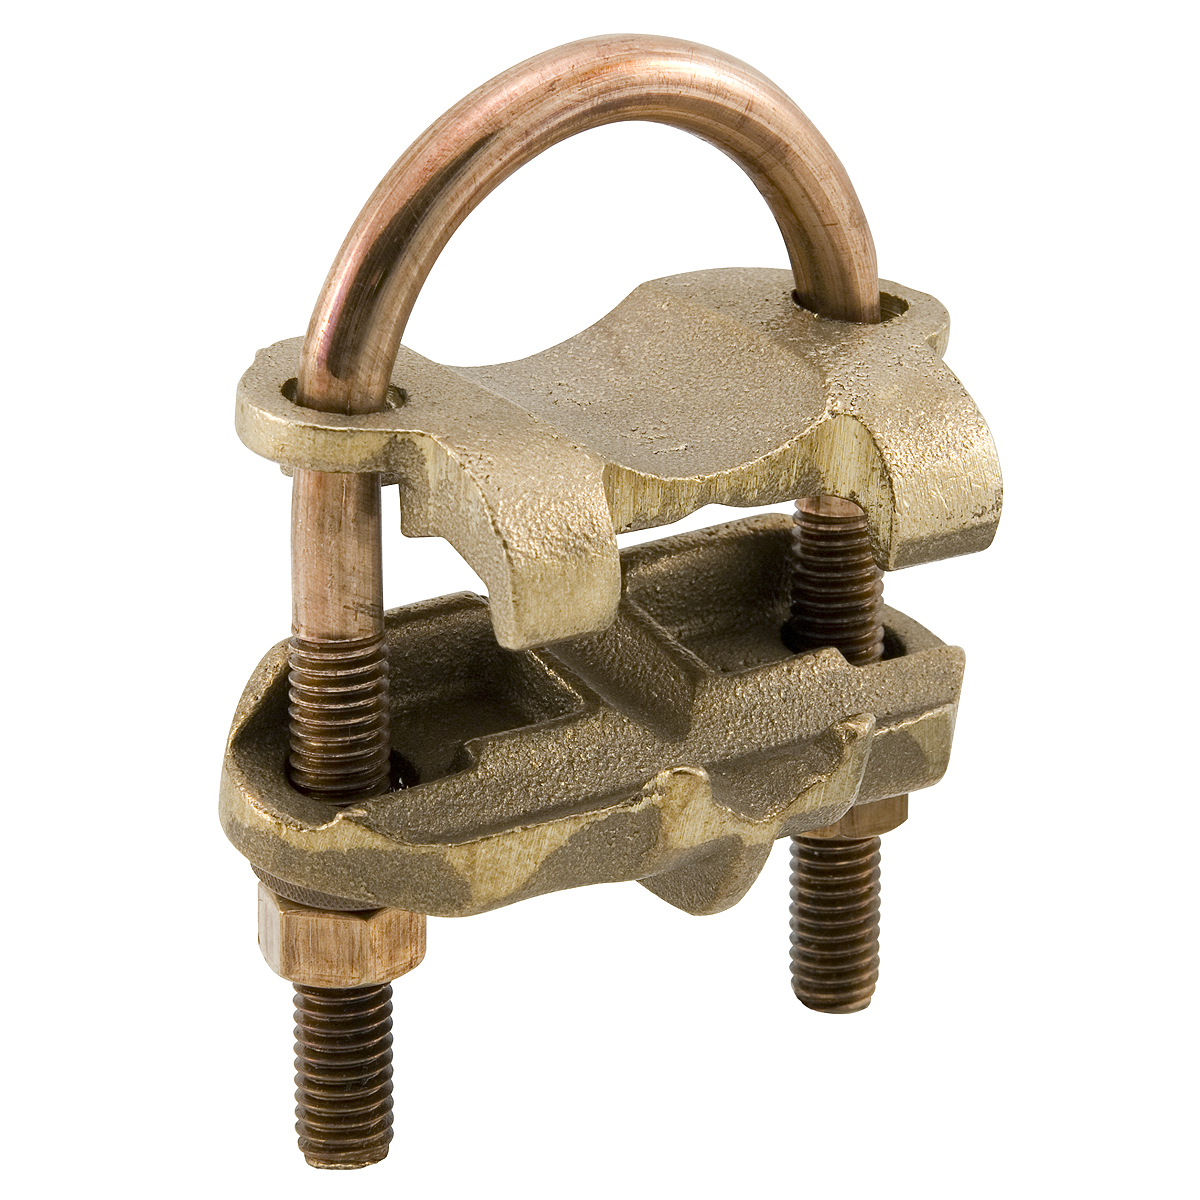 Our GPL ground clamps are UL Listed, CSA Certified, and suitable for direct burial in earth or concrete.  They have a specially designed spacer affording more positive contact area.  The clamps rotate 90 degrees for installation flexibility. 